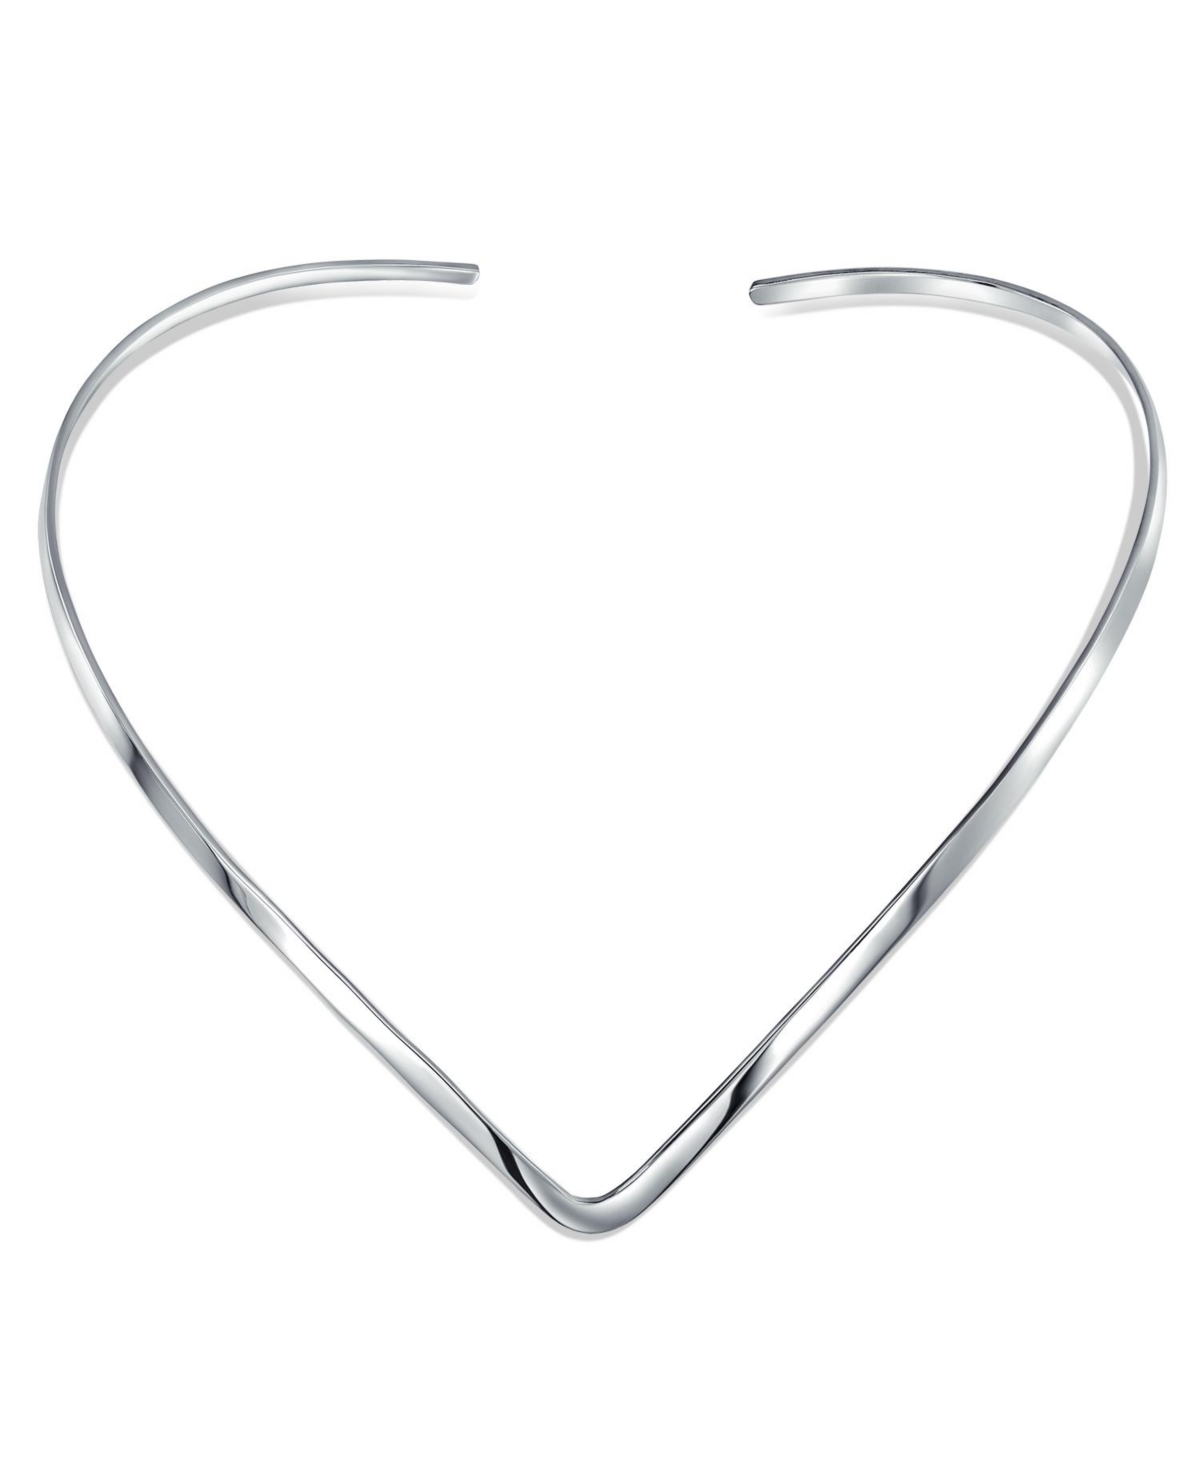 Basic Simple Slider Choker V Shape Collar Statement Necklace For Women .925 Silver Sterling Add Your Pendant 3MM - Silver